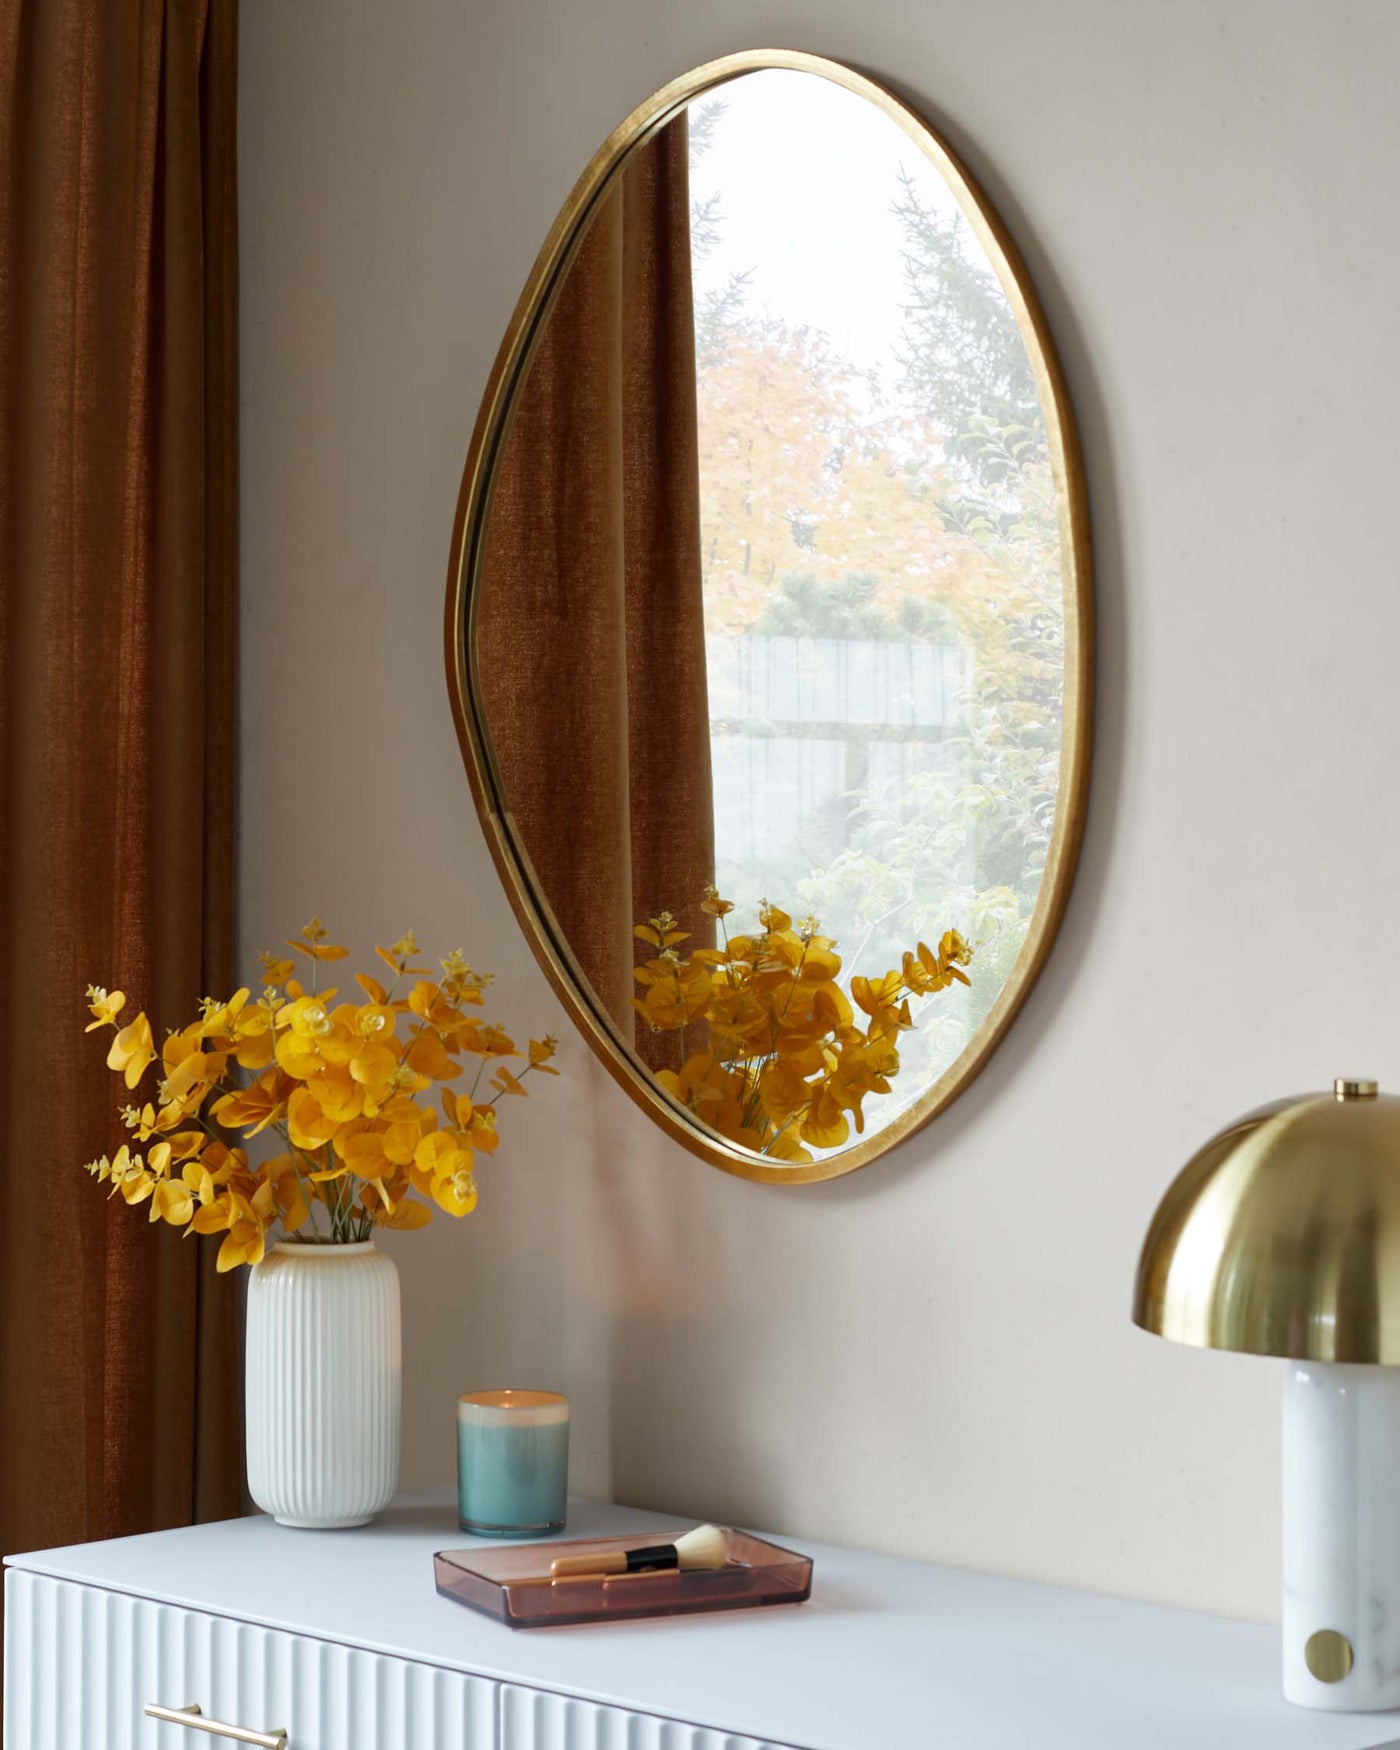 A sleek, modern white console table with textured front panels, featuring minimalist golden handles and a smooth, flat top surface. A round mirror with a thin, golden frame hangs above it.